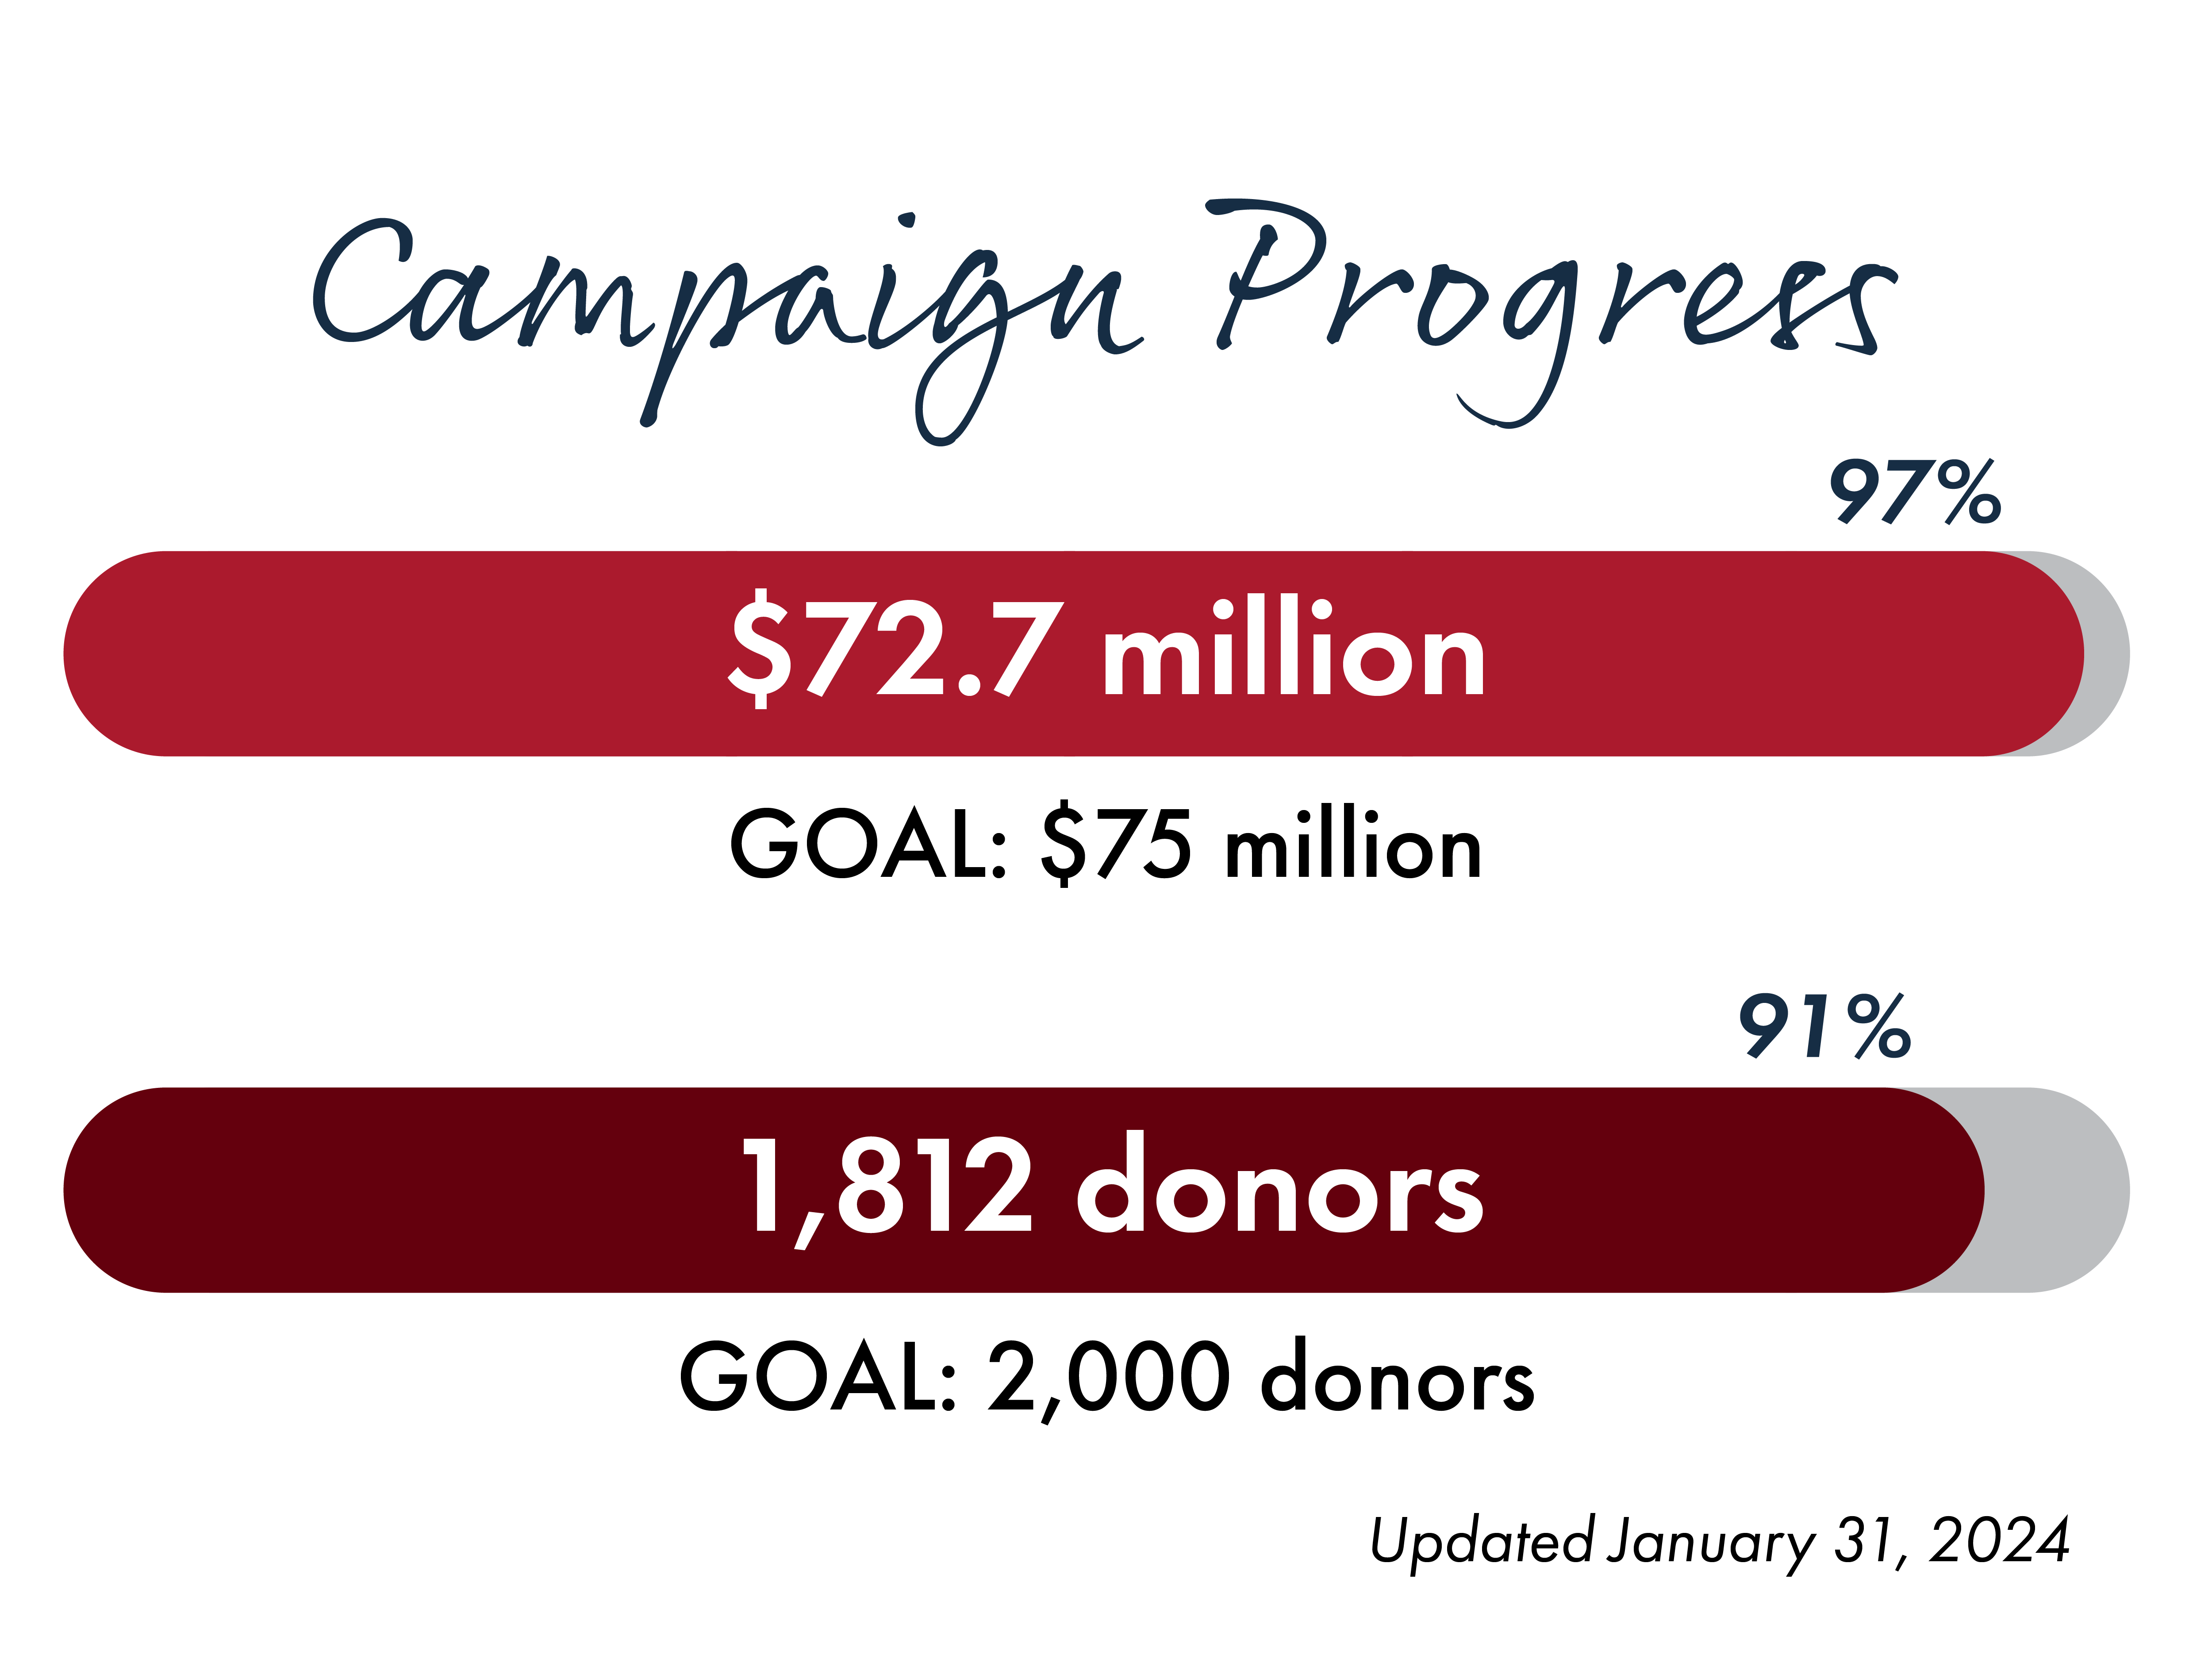 Graphic showing campaign fundraising progress of $72.7 million from 1,812 donors as of Jan. 31, 2024